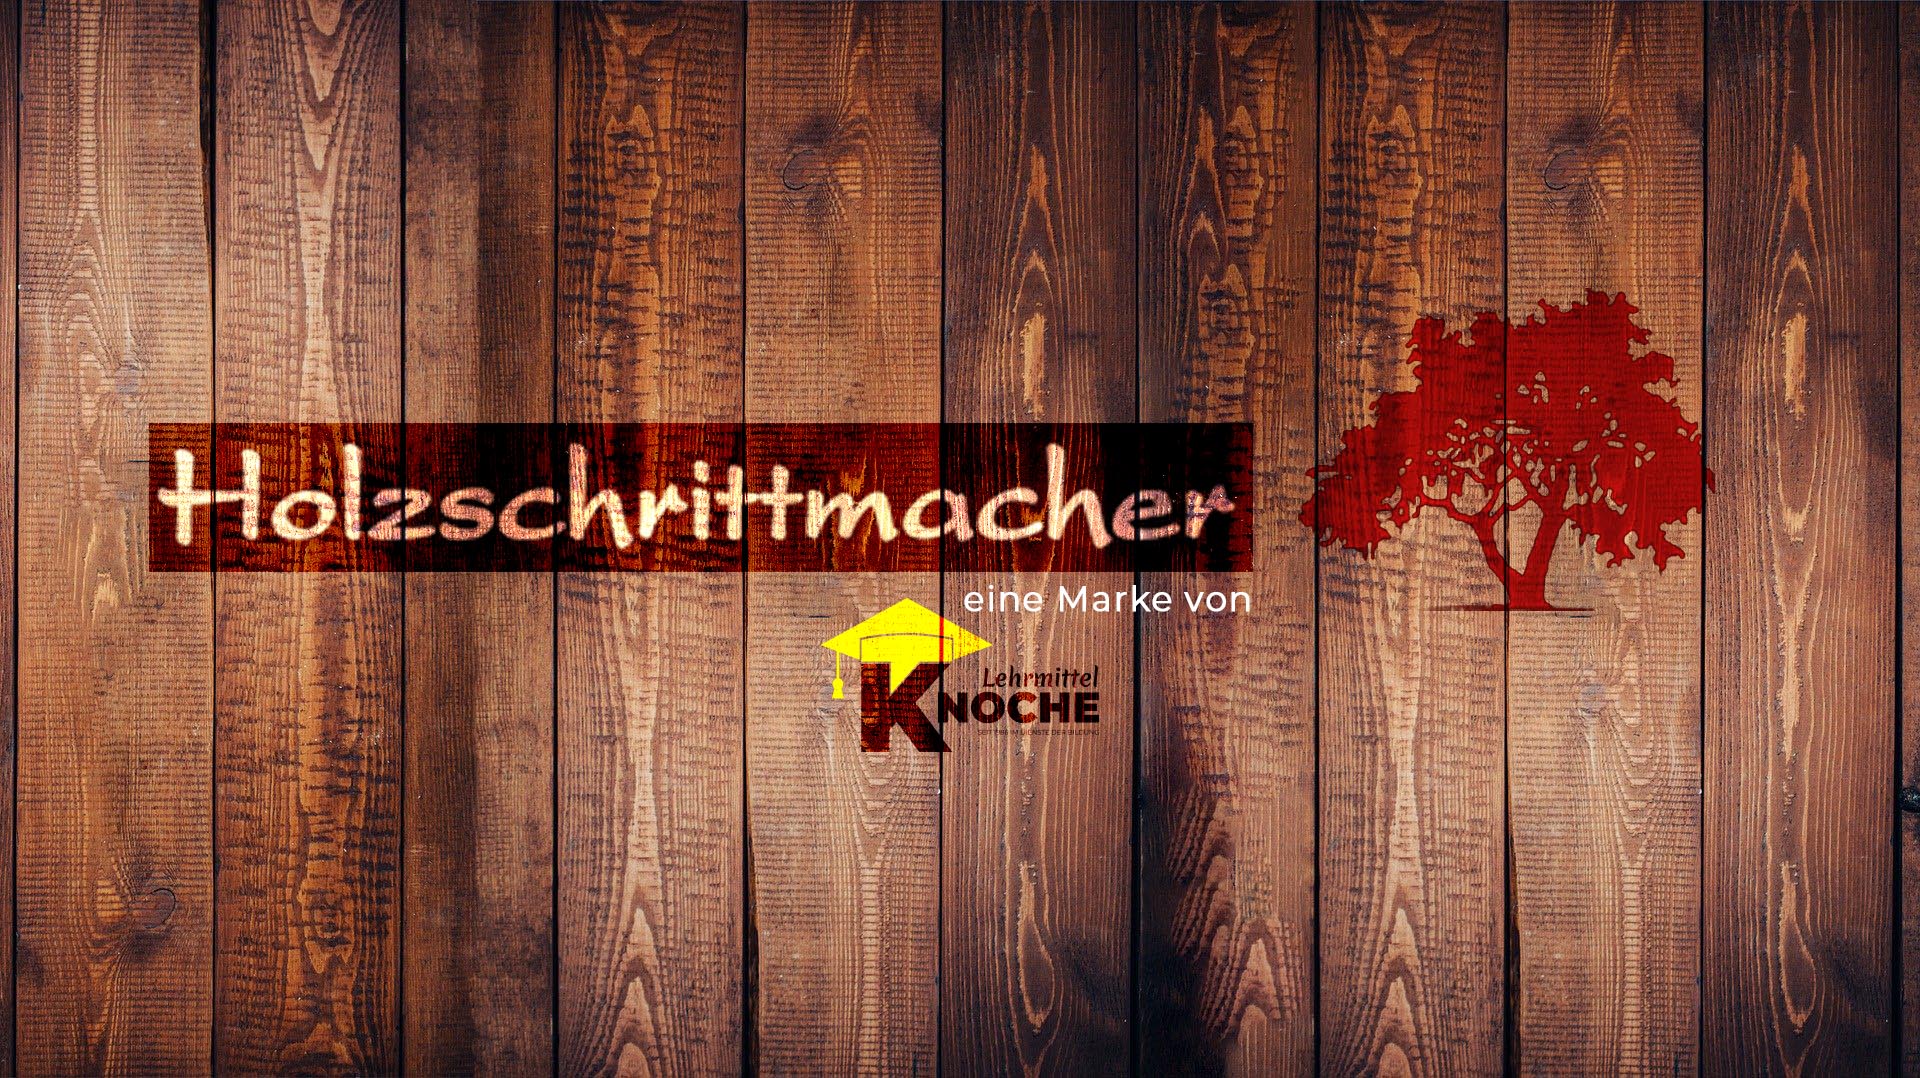 You are currently viewing Holzschrittmacher